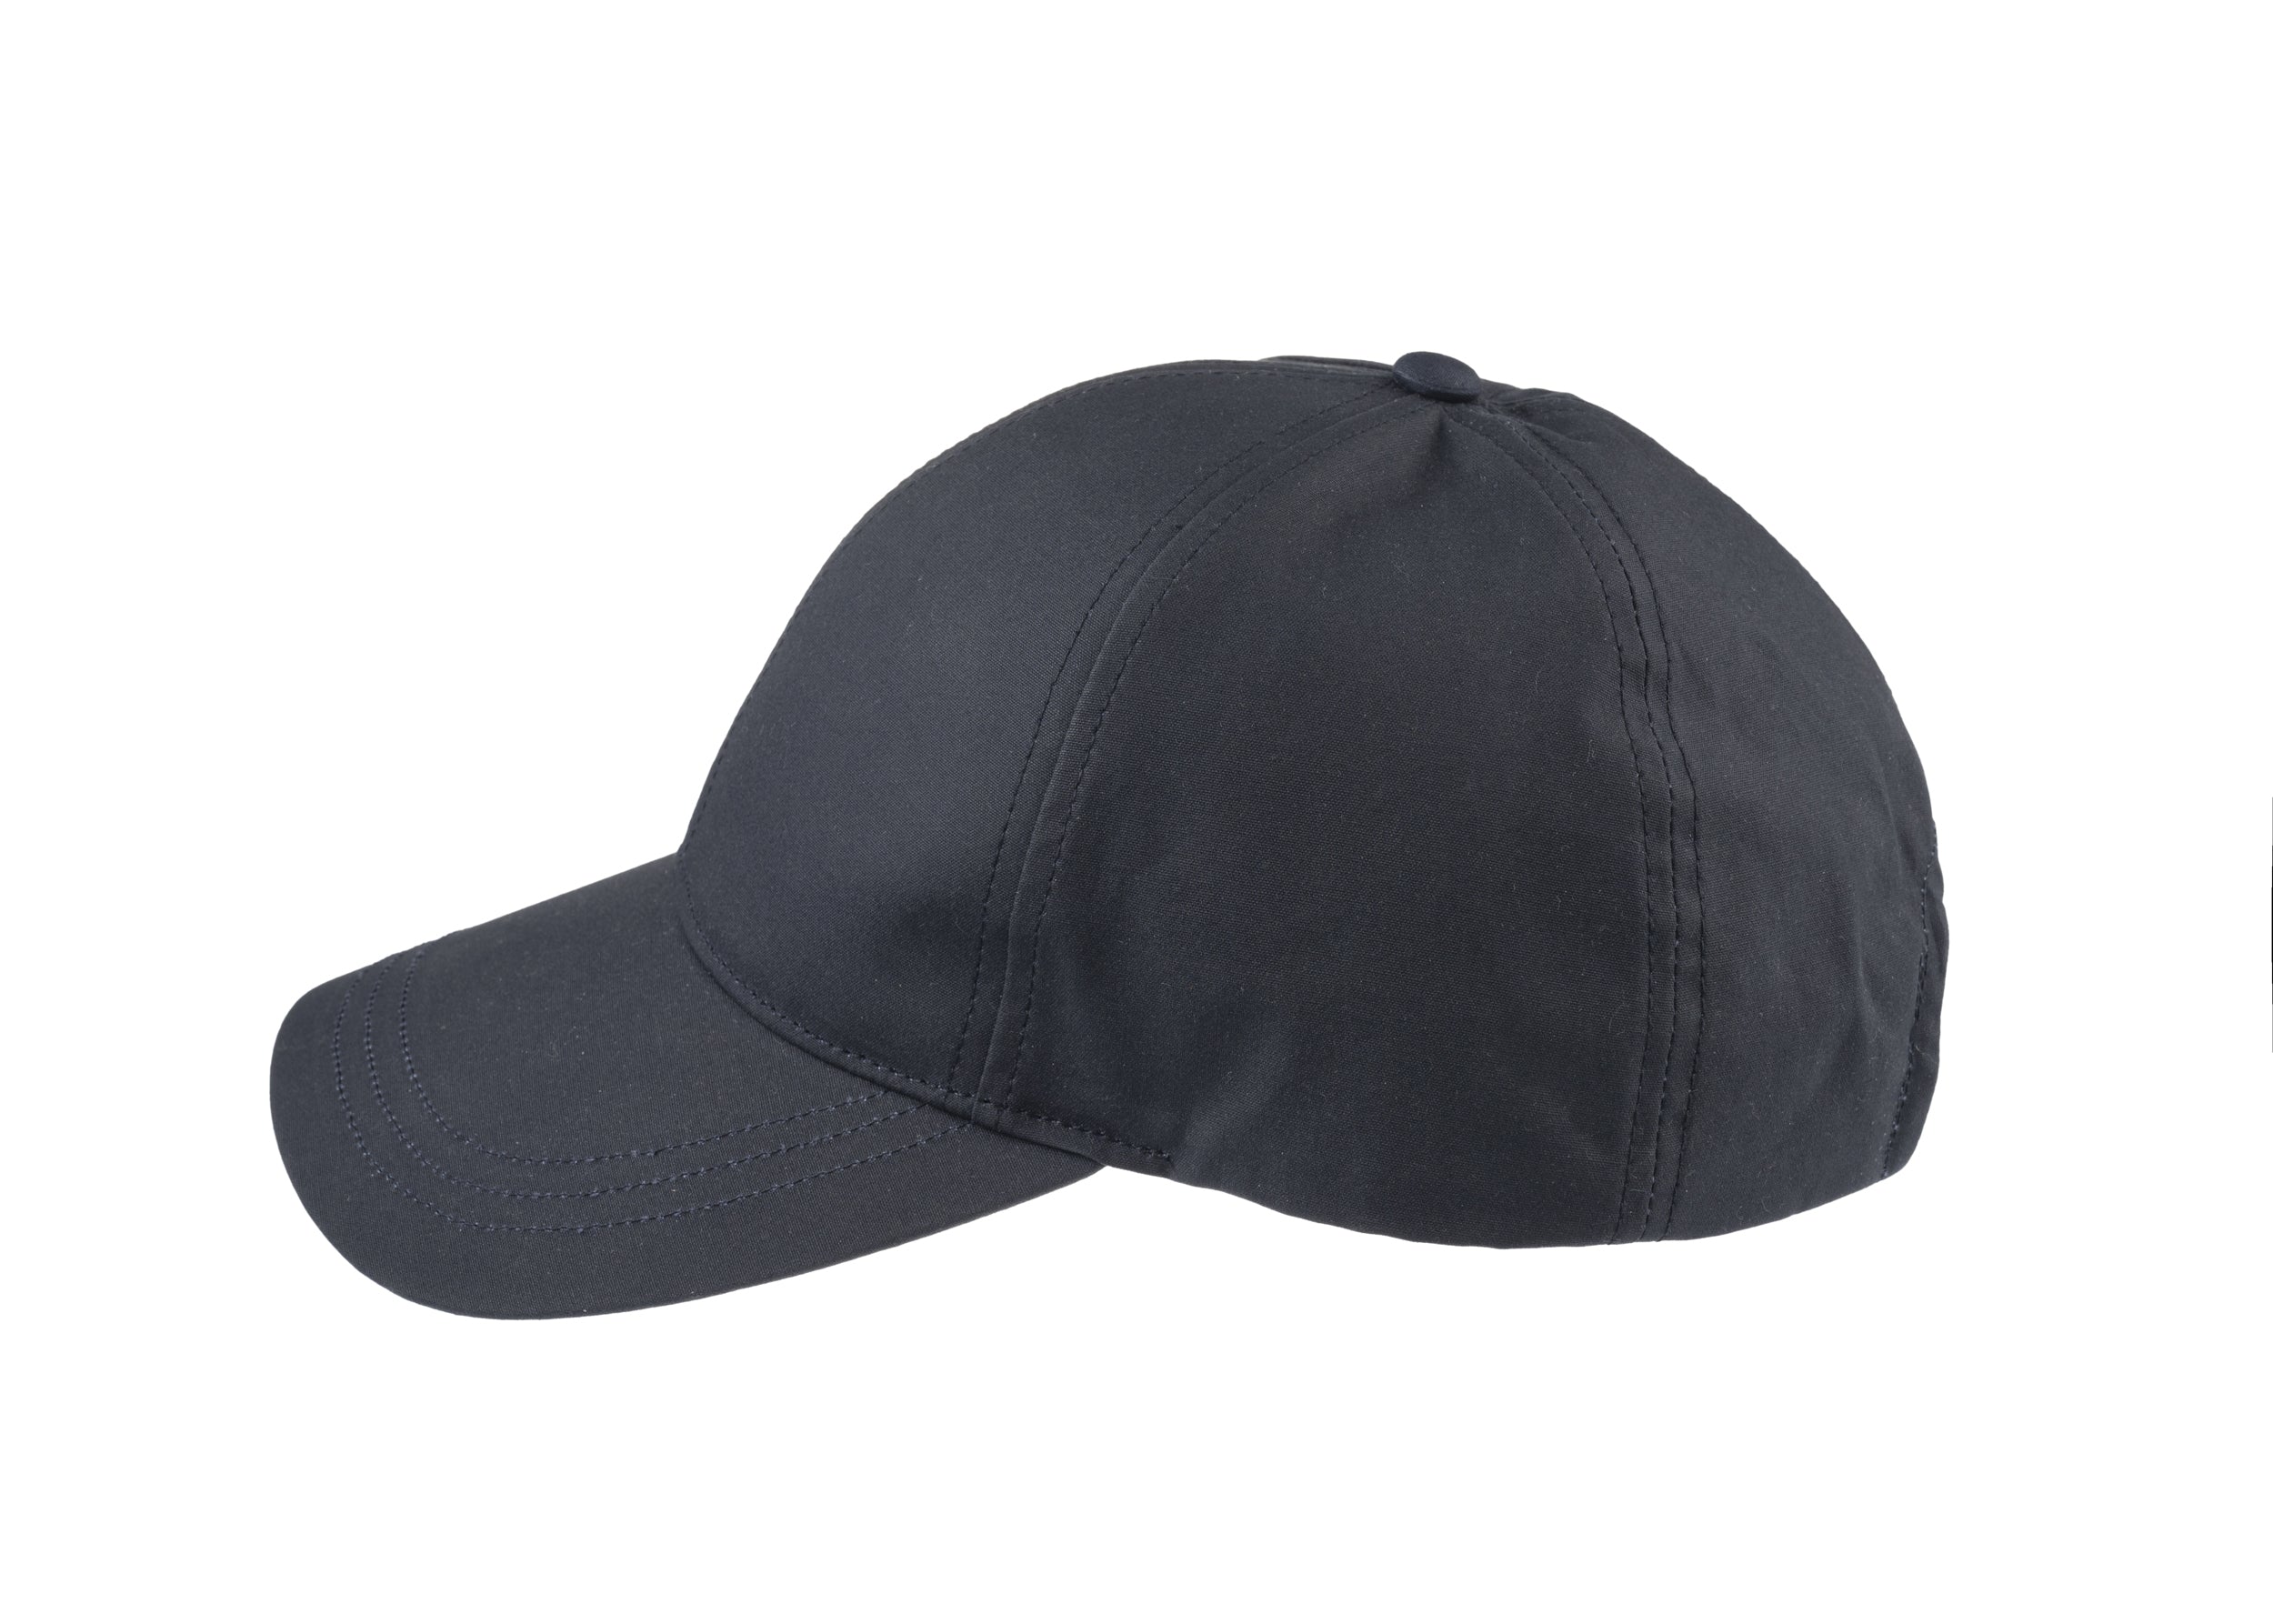 Baseball Cap cotton wax fabric with one size adjuster